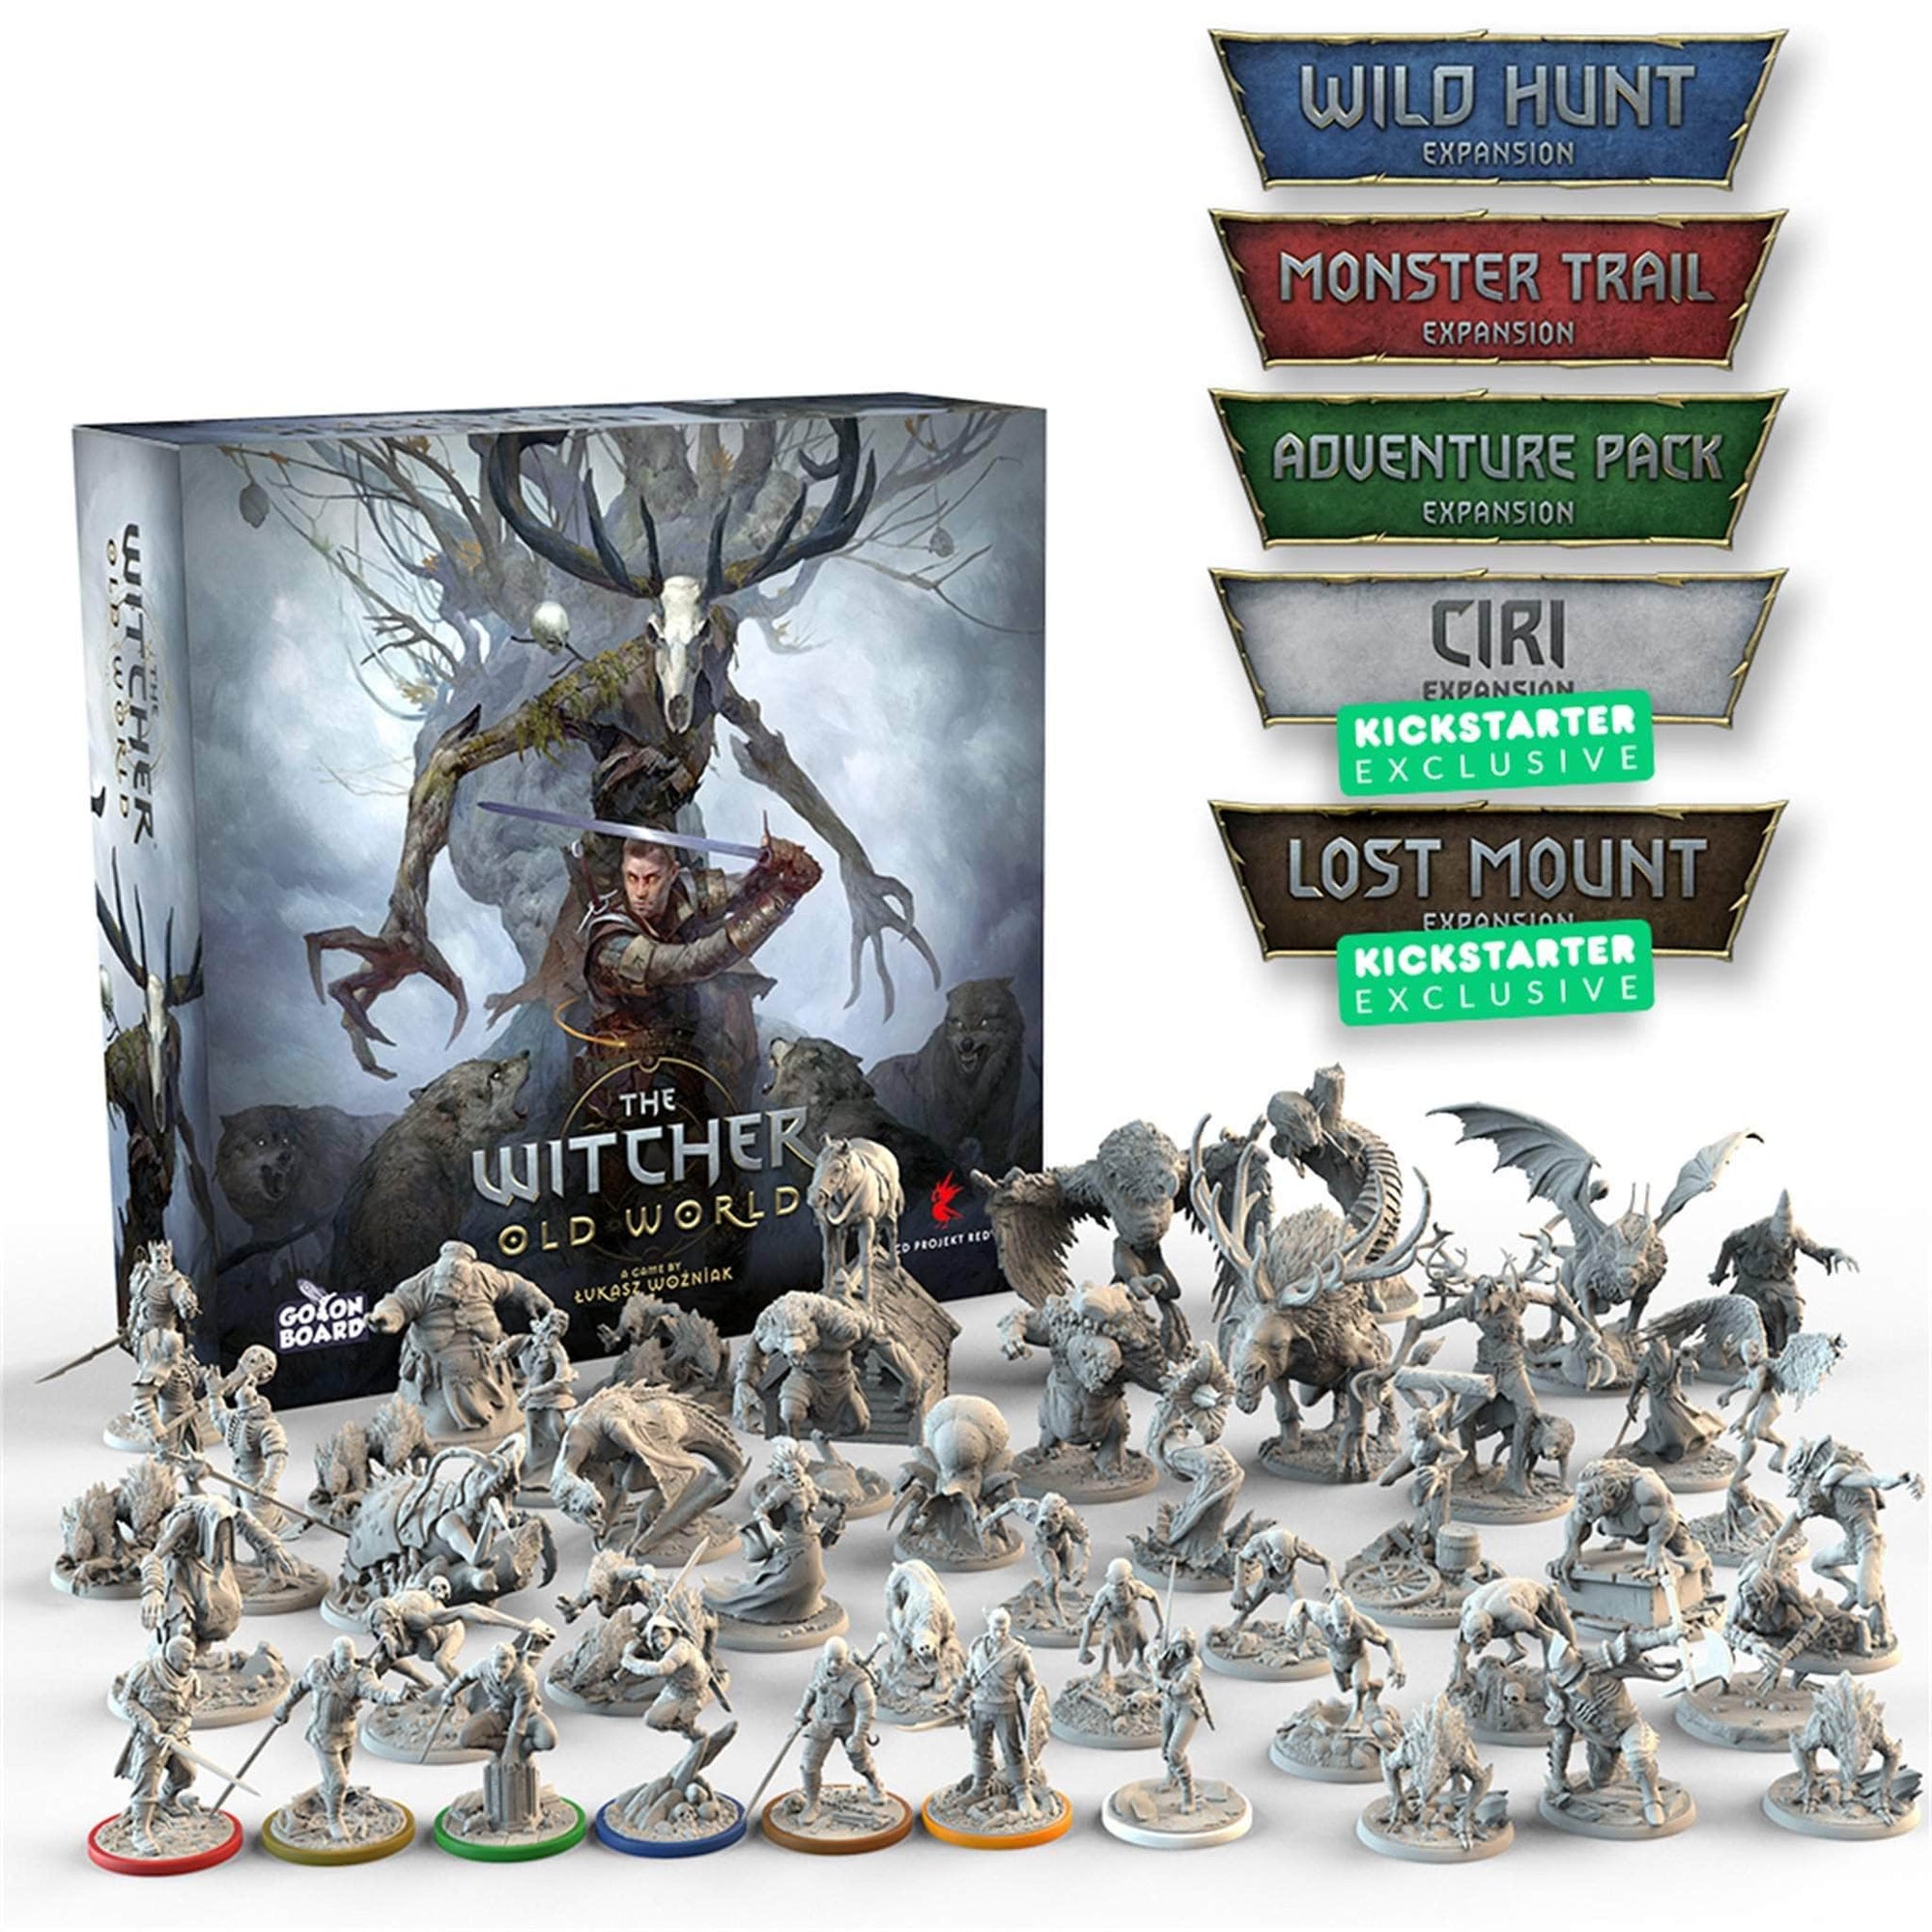 The Witcher: Welloxe Deluxe Box Box Box Bundle (Kickstarter Special Special) Go On Board KS001114C